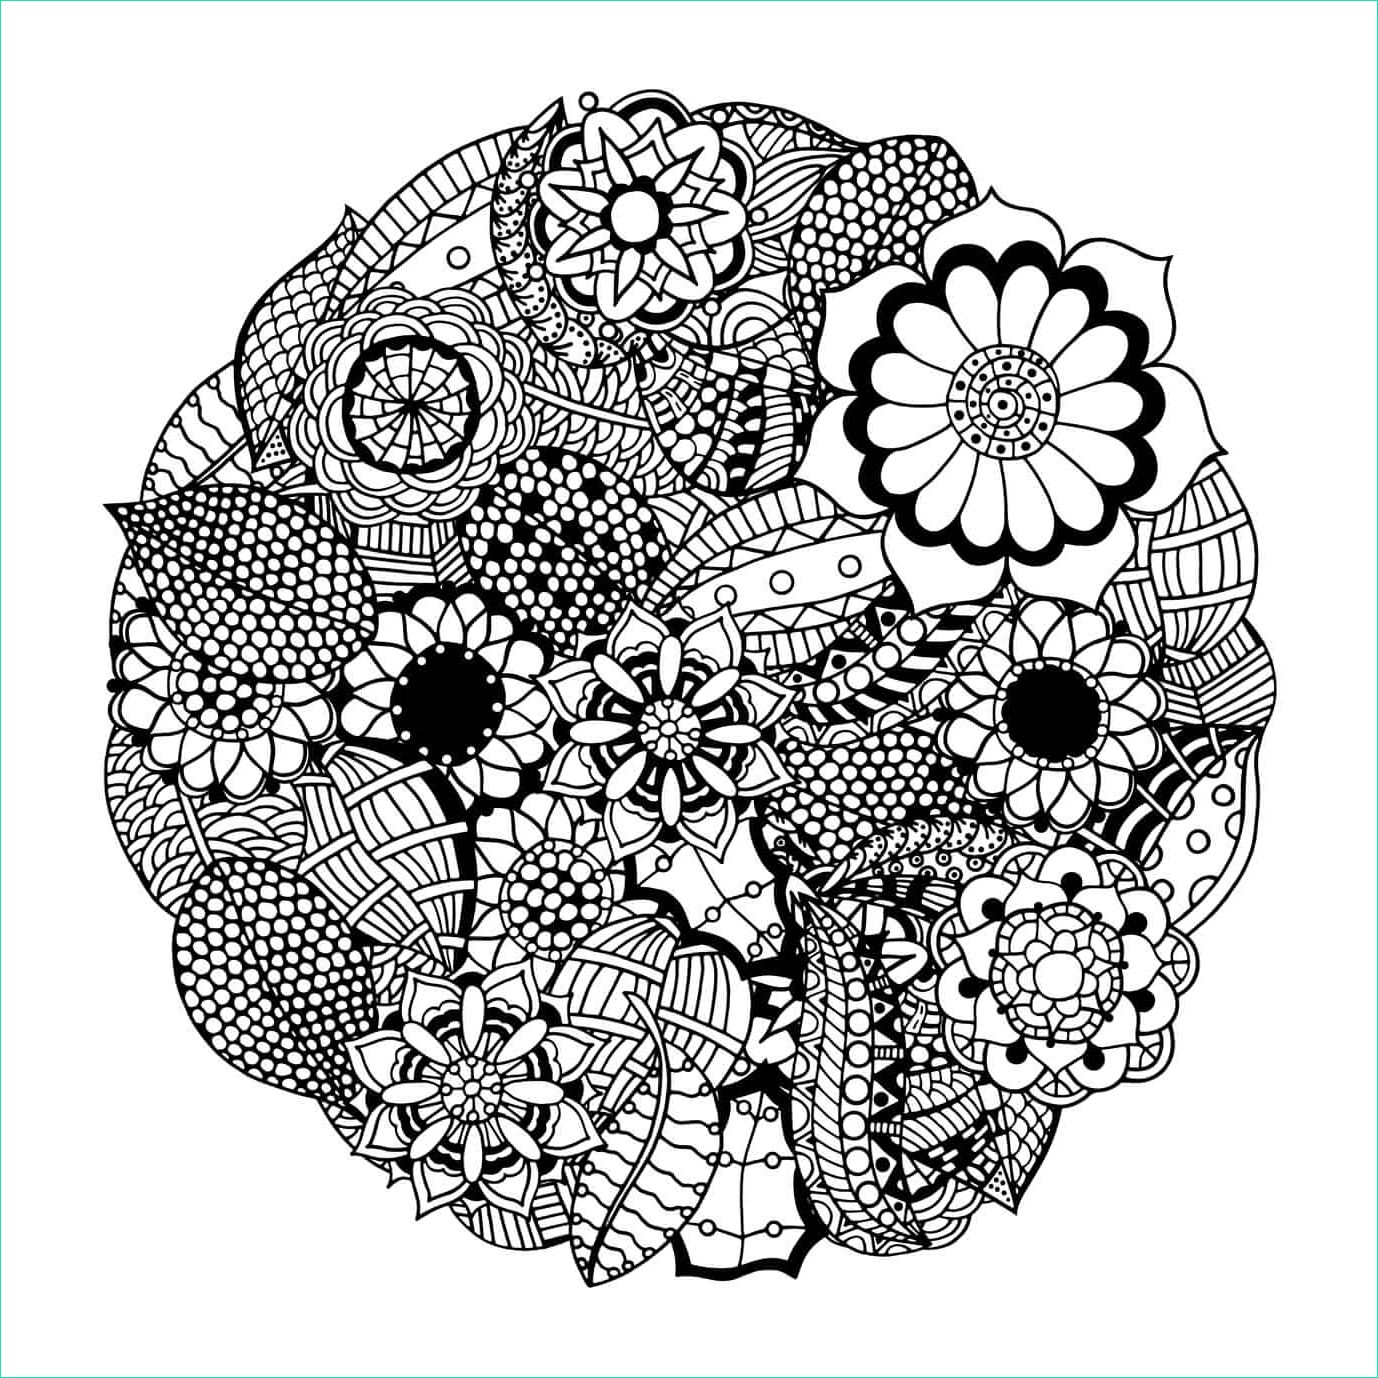 these printable abstract coloring pages relieve stress and help you meditate